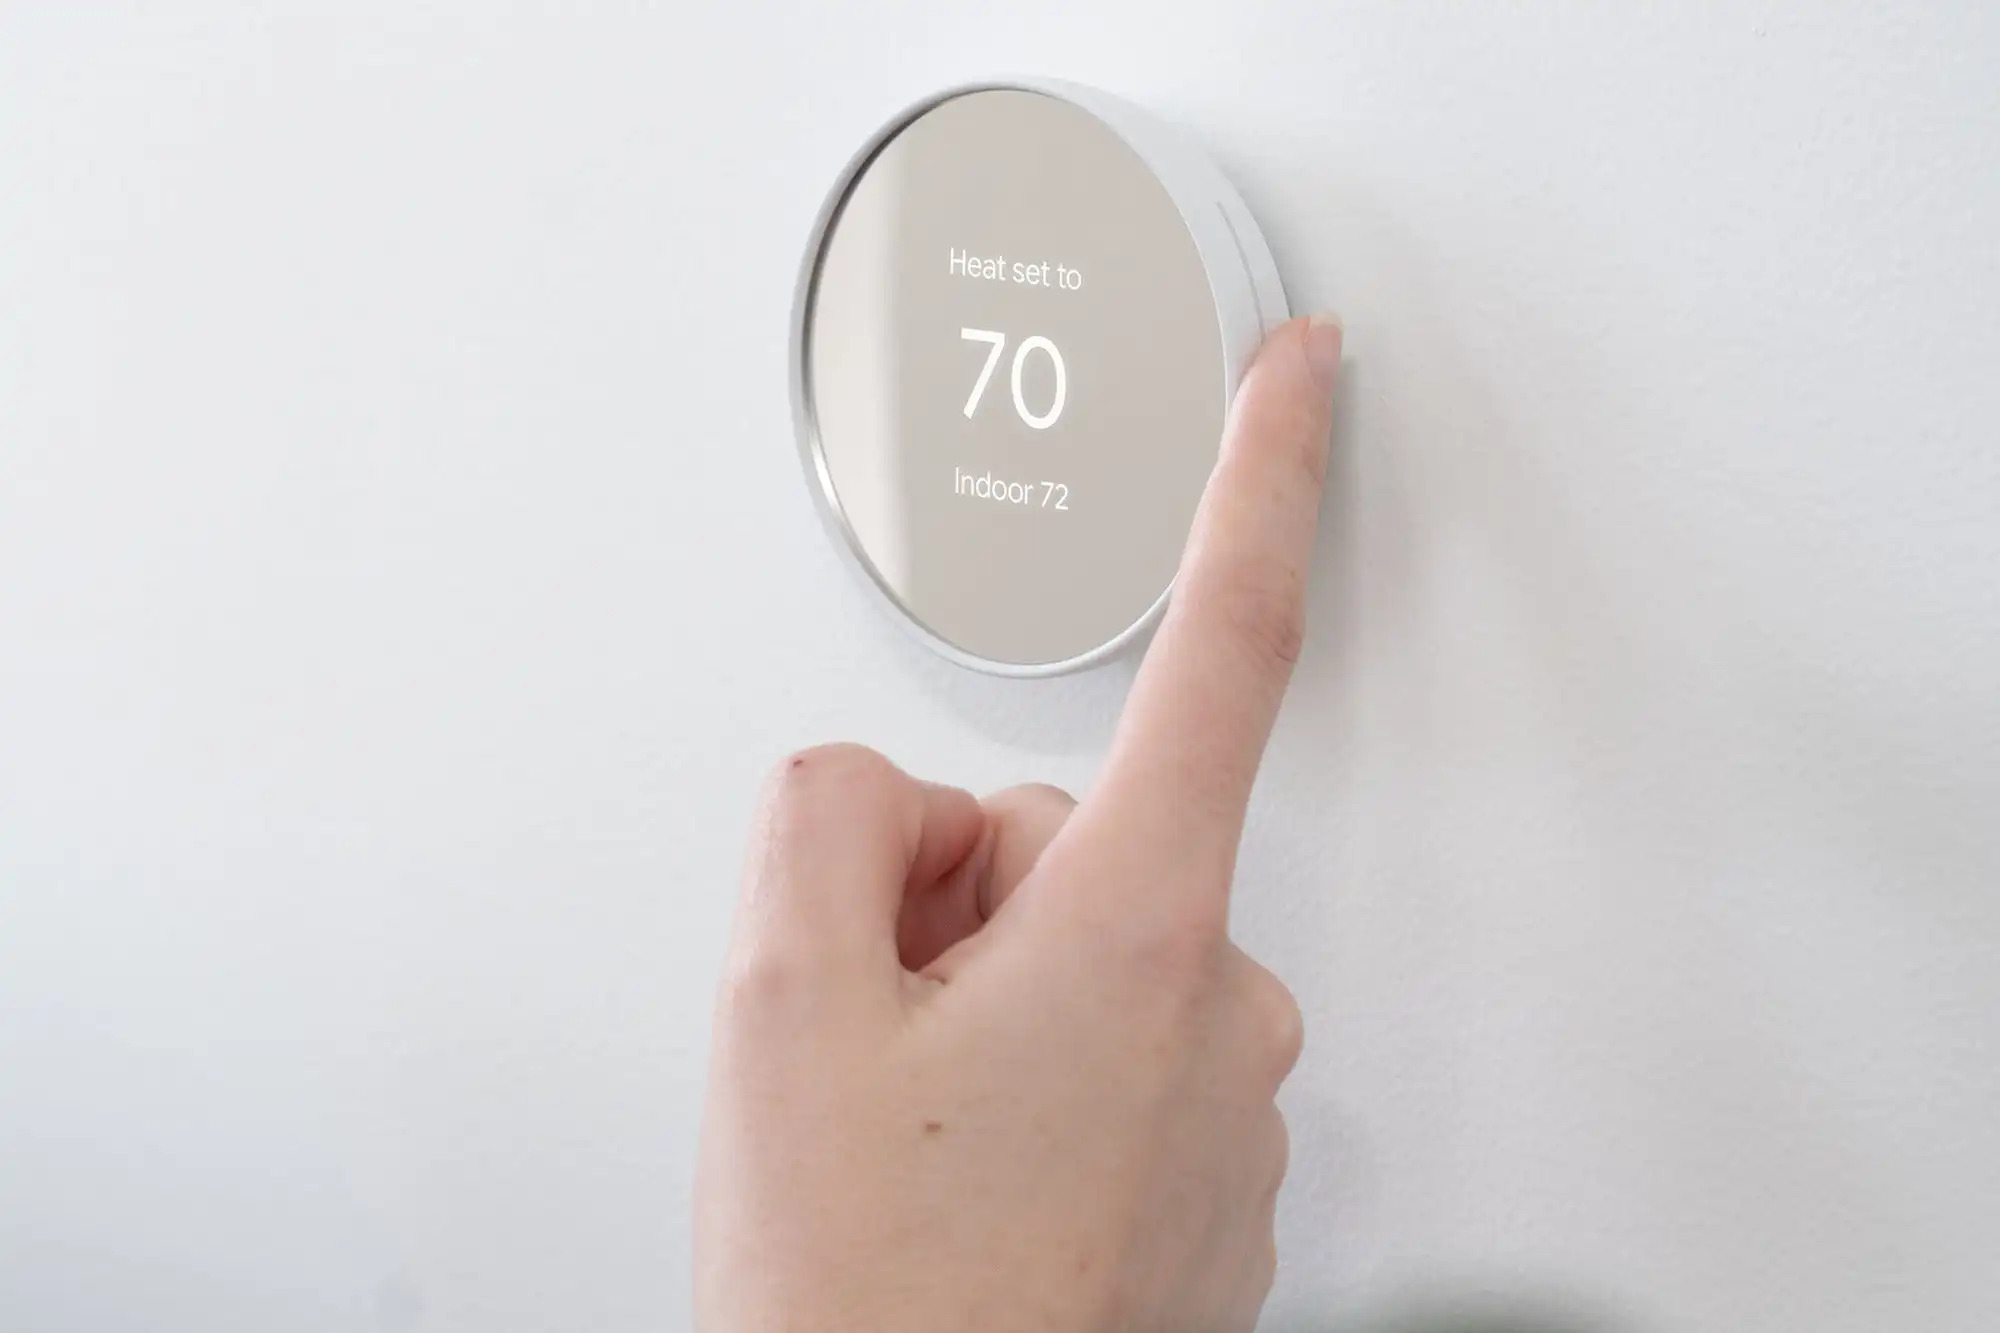 Google’s New Thermostat: Same Look, New Privacy Concerns